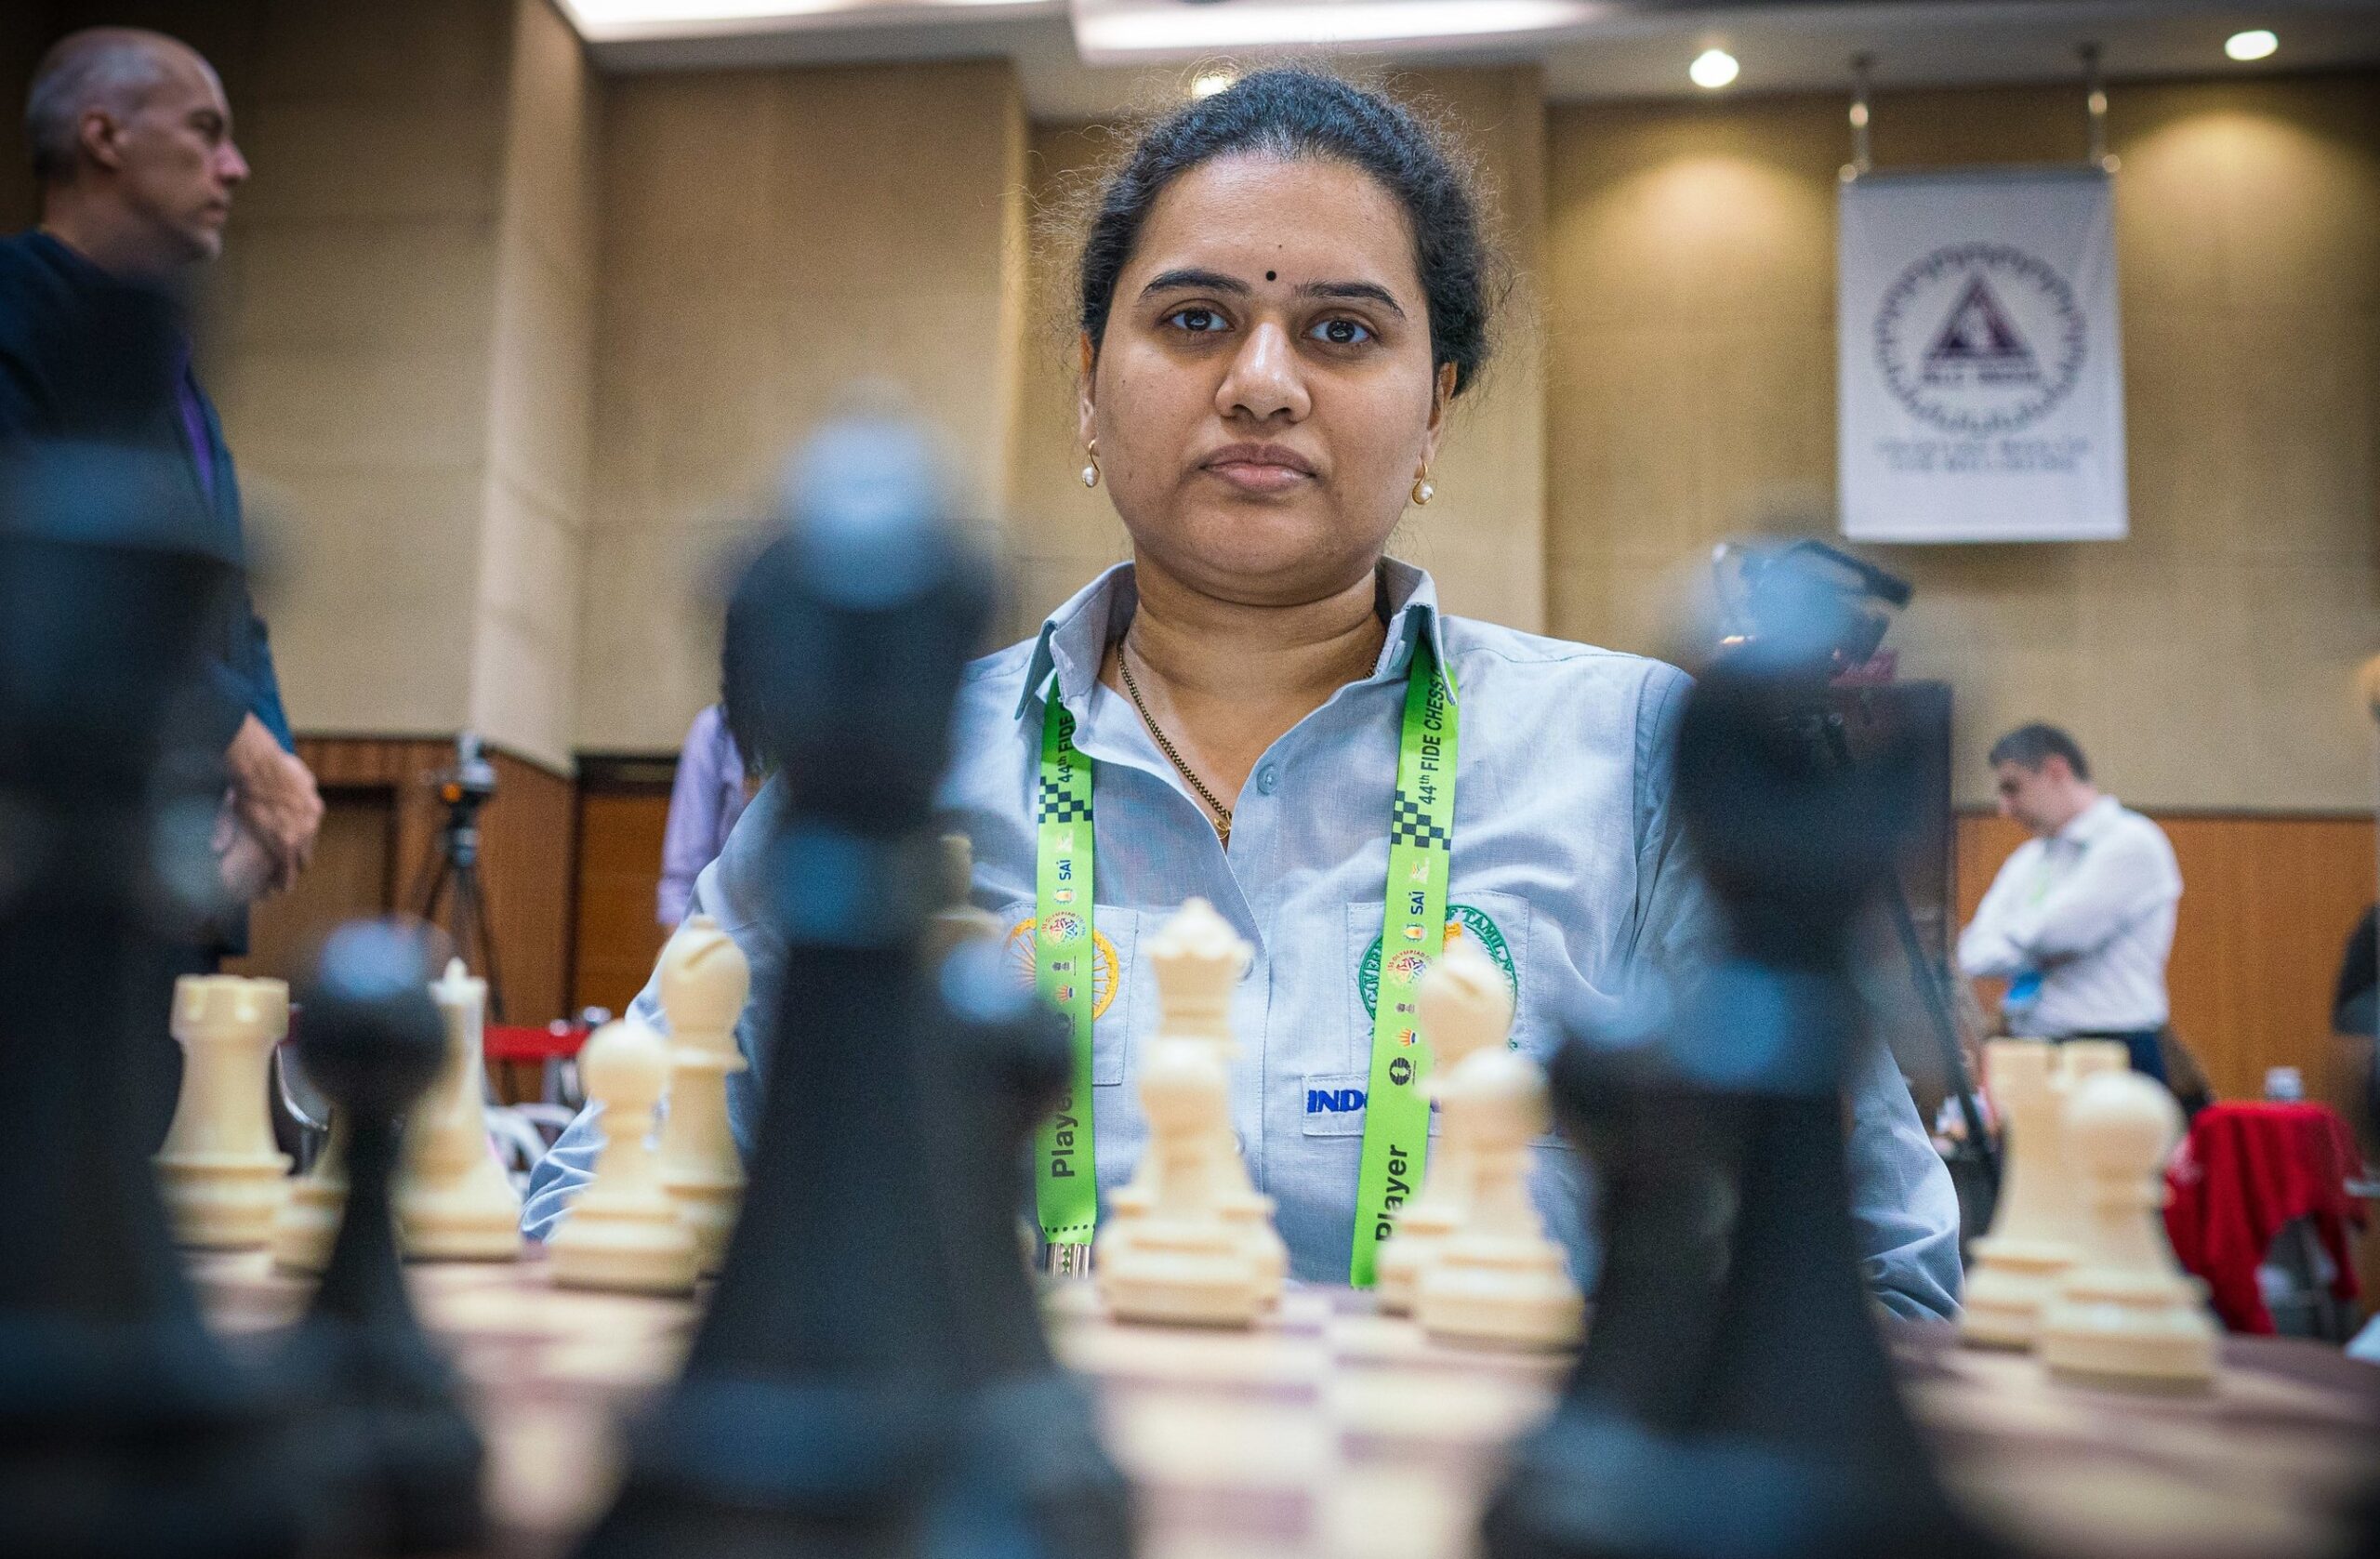   Chess Olympiad: Indian women clinch historic first-ever medal at 44th Chess Olympiad; bronze in open section